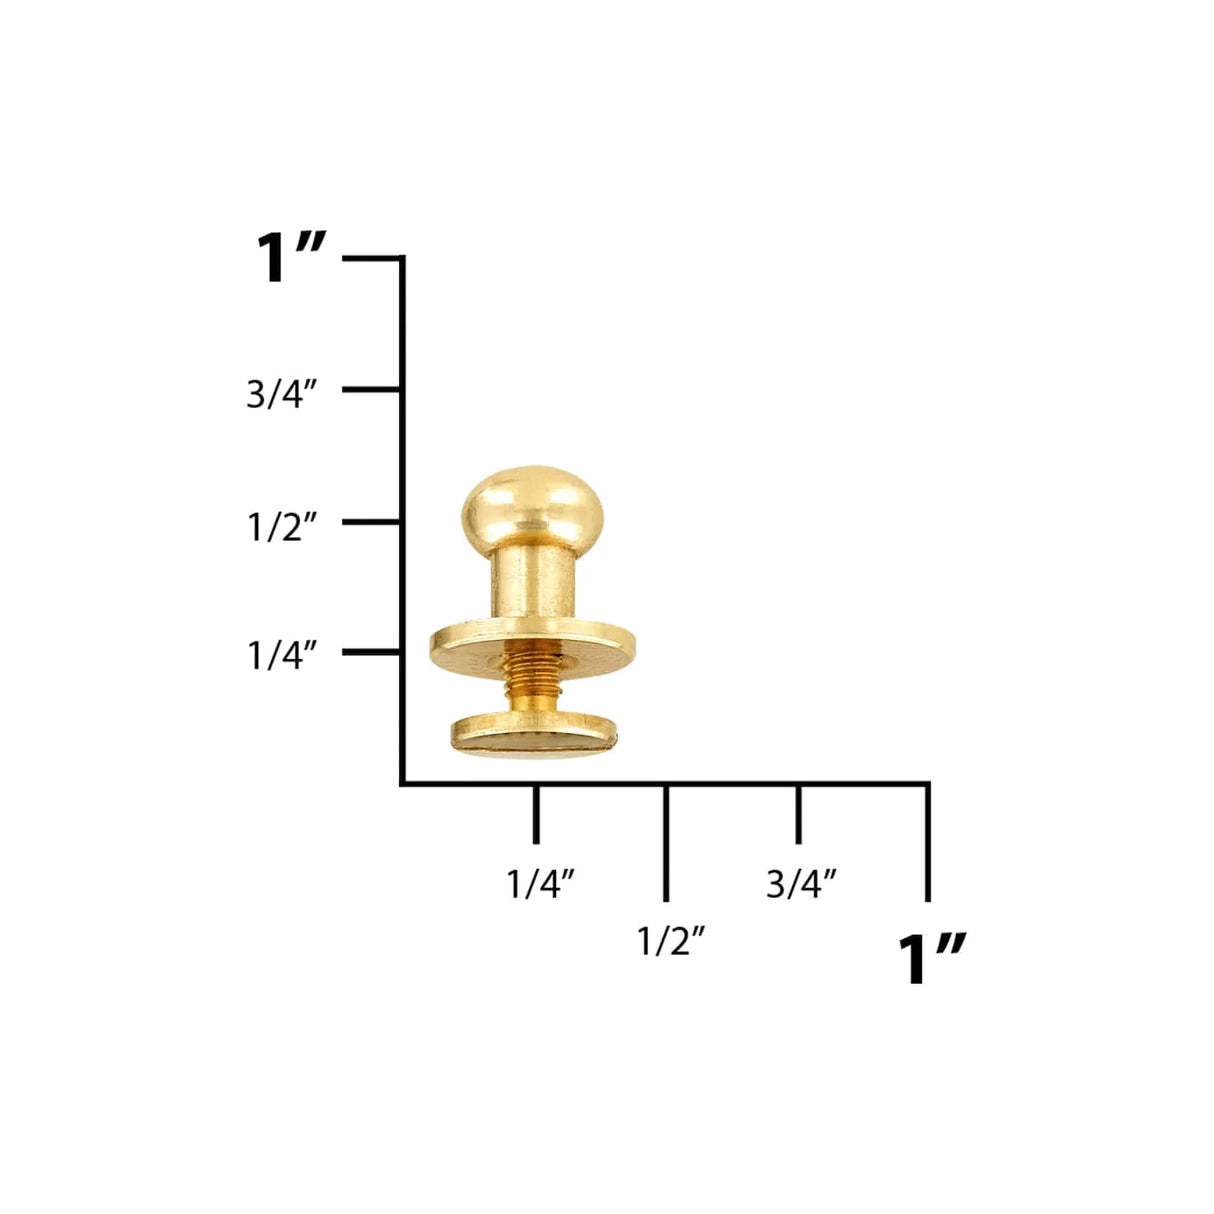 10mm, Brass, Flat Top Collar Button Stud with Screw, Solid Brass - PK5, #P-287-SM-SB